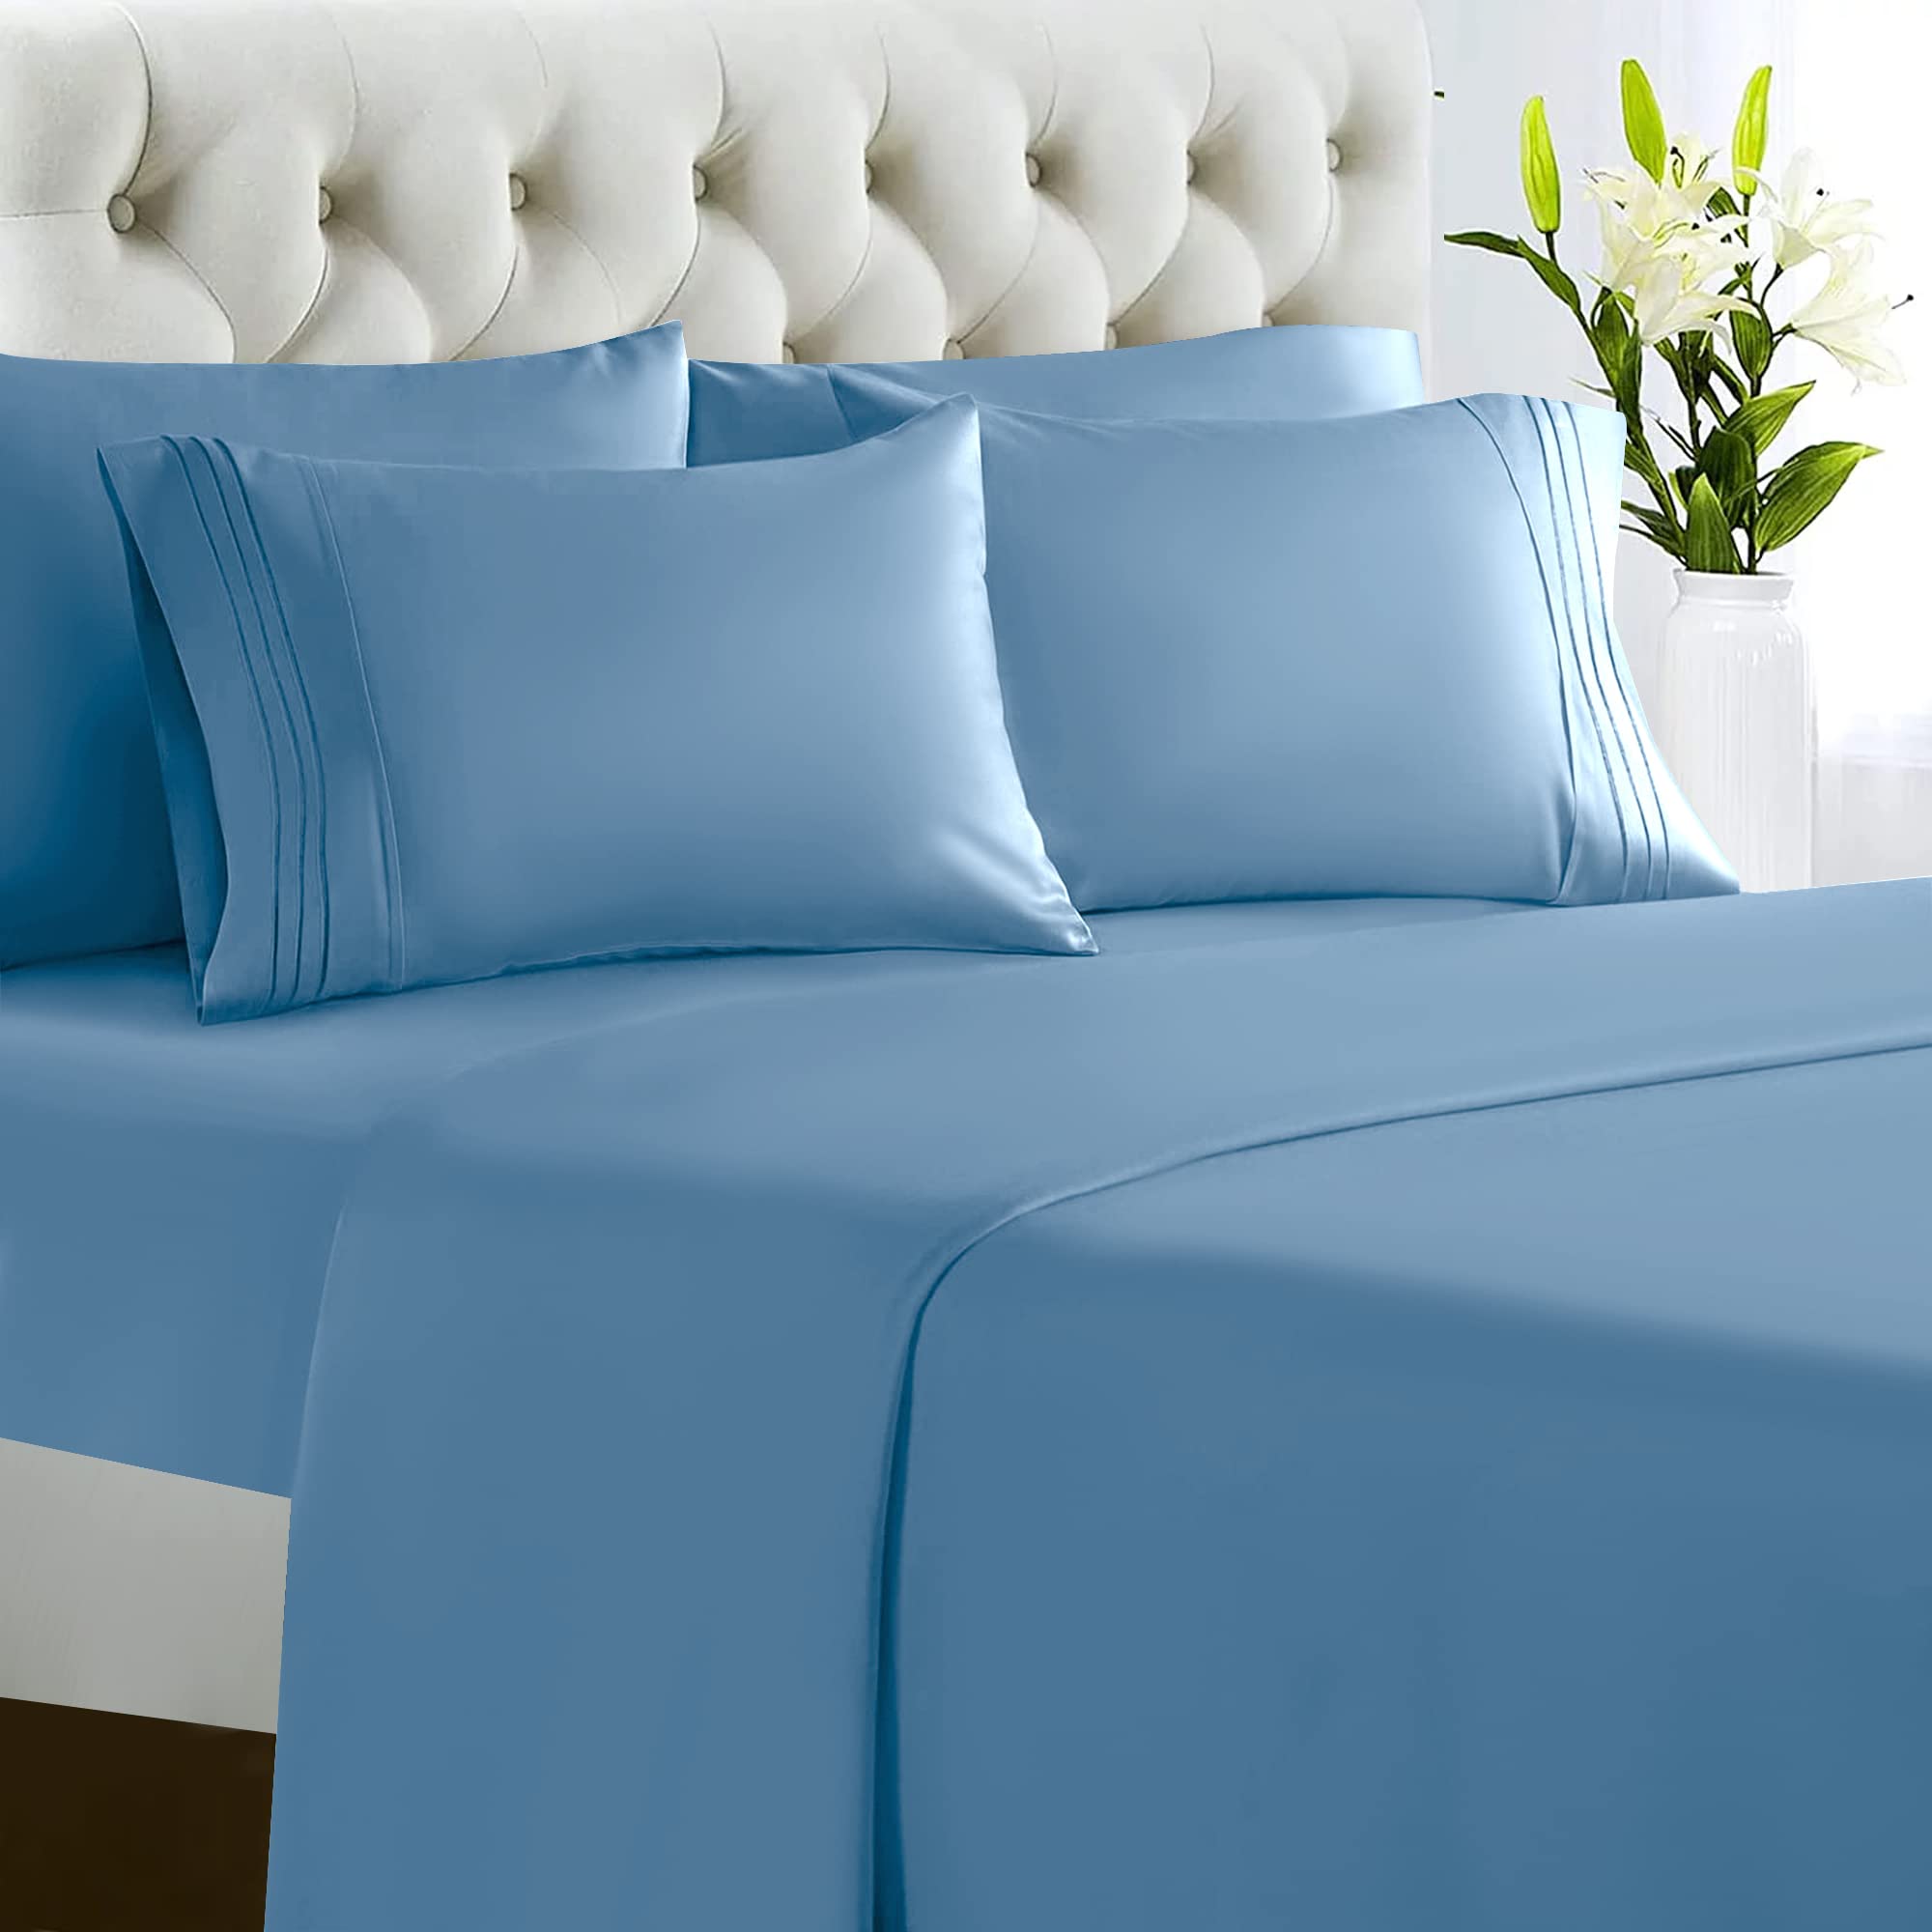 Book Cover Lux Decor Collection Bed Sheets - 6 Pc Full Size Sheet Sets - 1800 Thread Count Brushed Microfiber Sheets - 16 Inches Deep Pocket Bedding Sheets & Pillowcases|Lightweight Sheets Embroidery Blue Full